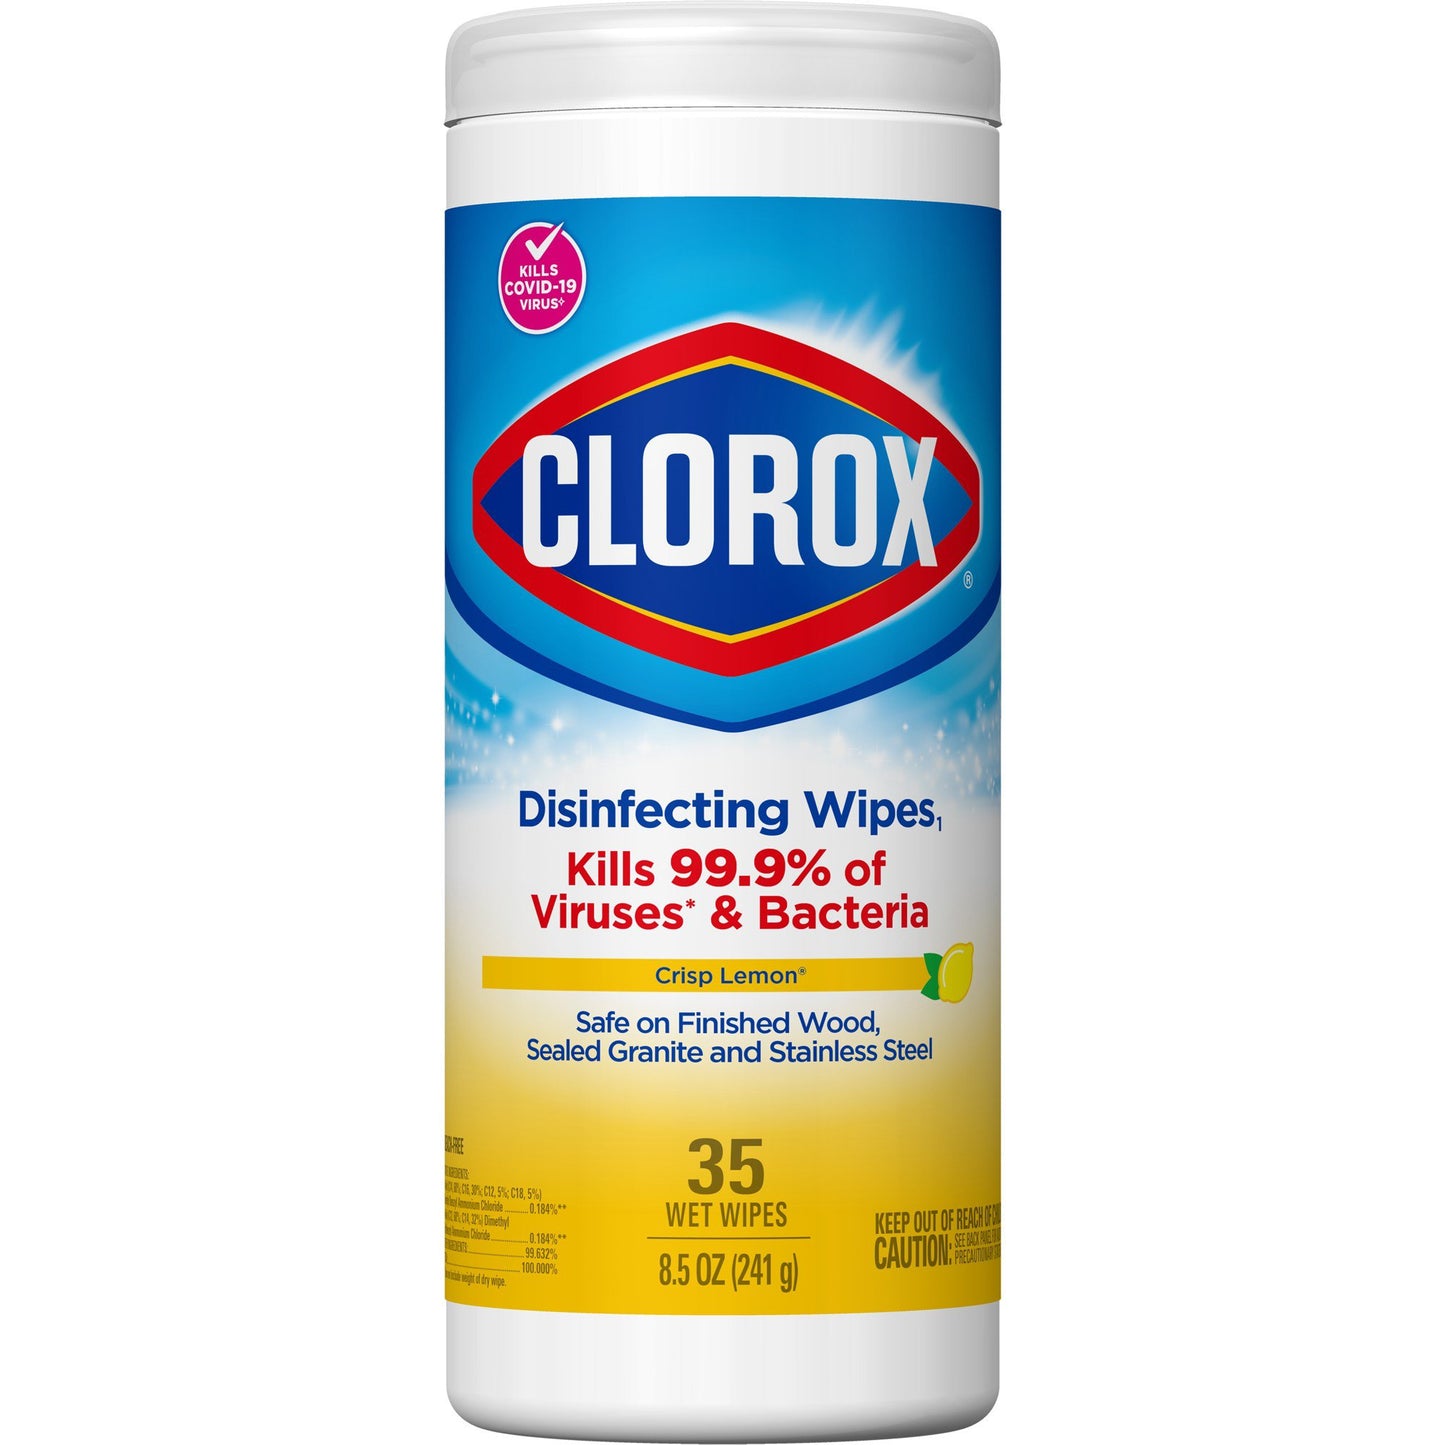 Clorox Surface Disinfectant Wipes, Small Canister